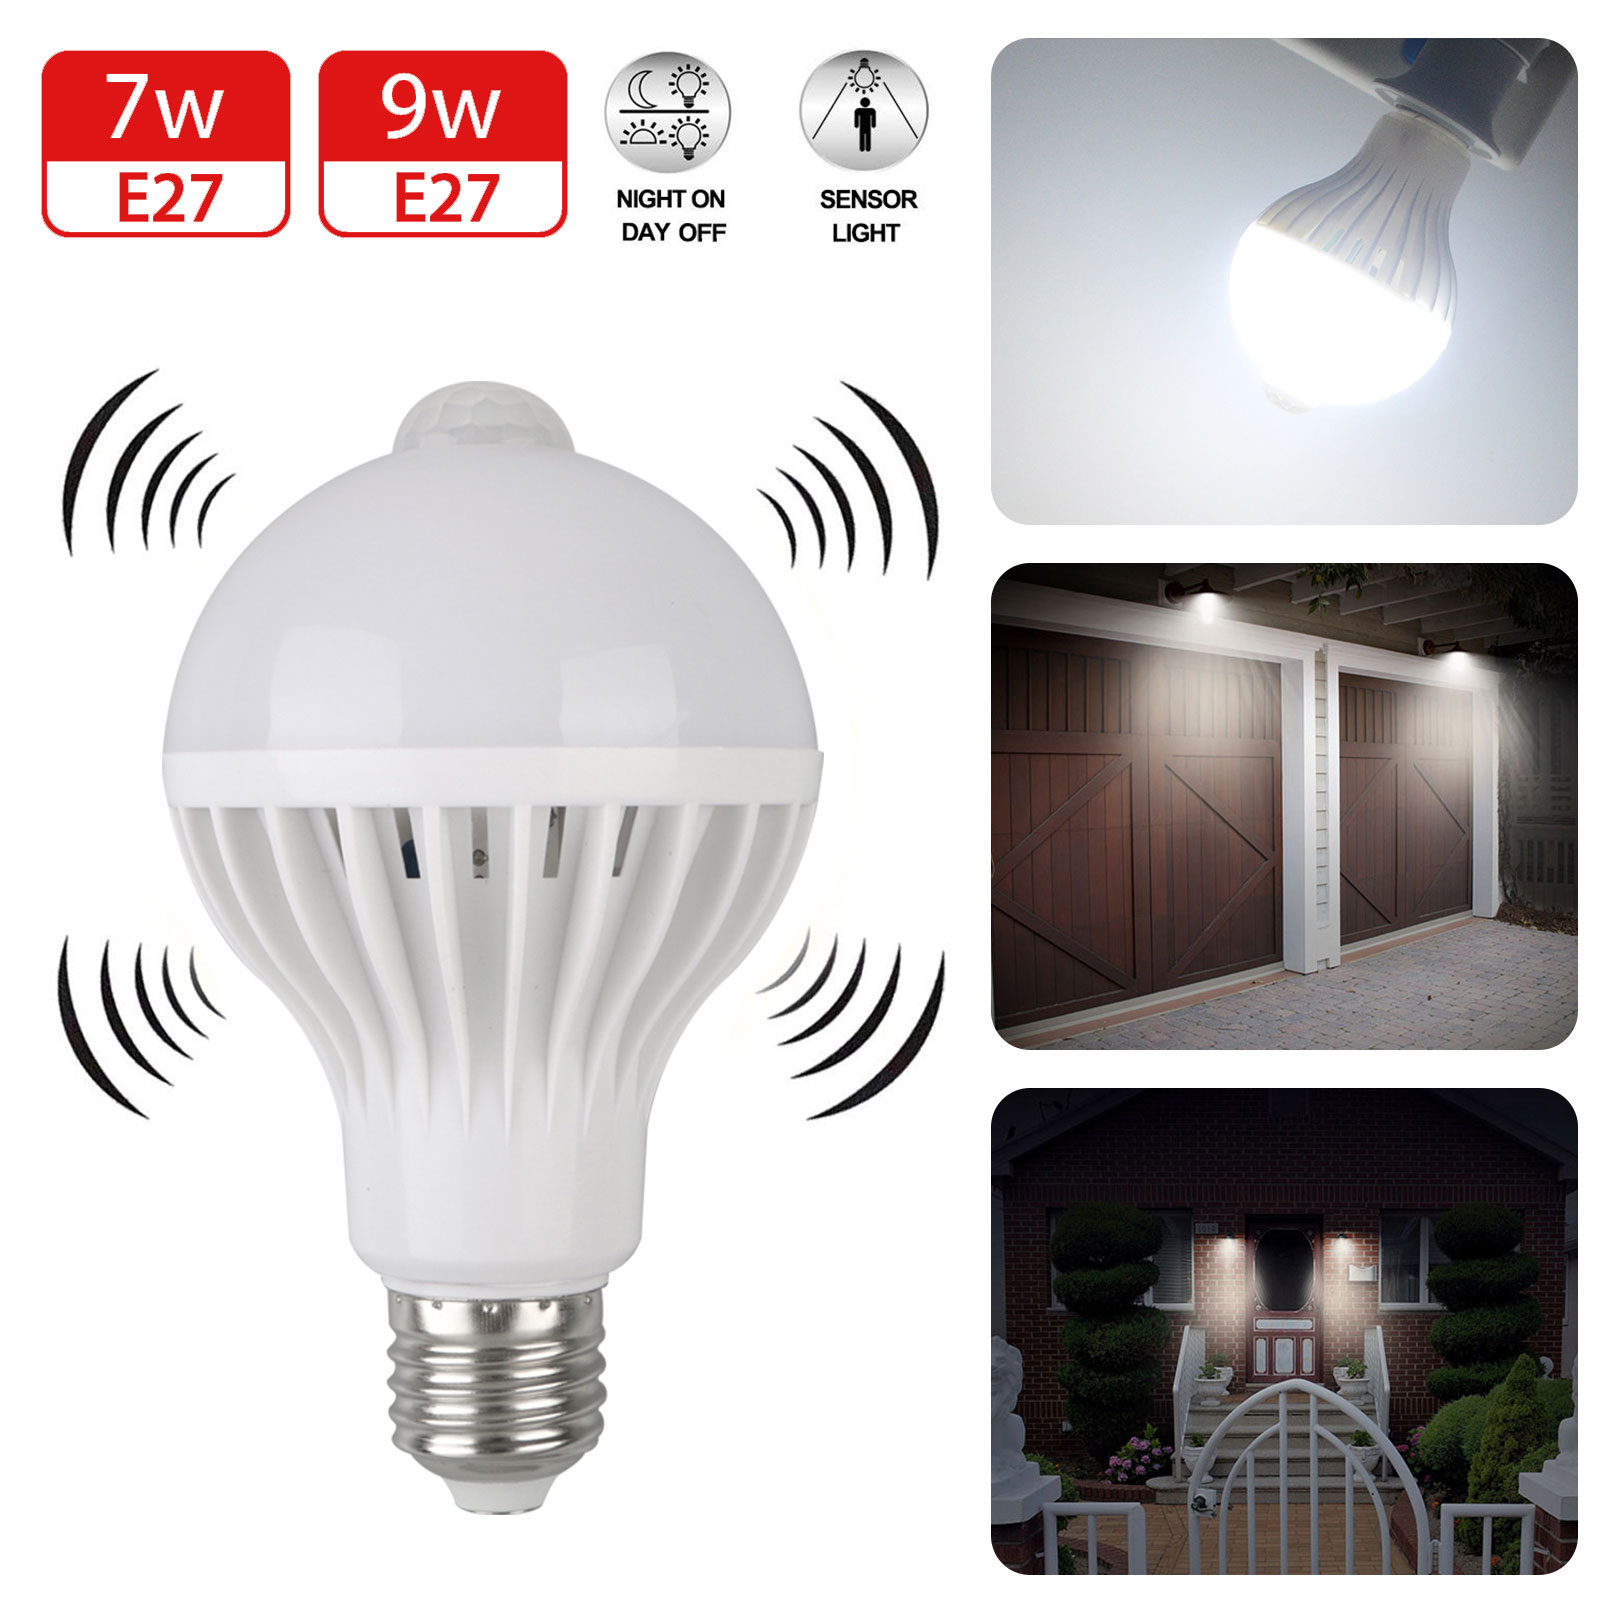 INDOOR/OUTDOOR MOTION SENSOR Light Bulb Motion Activated LED Dusk to